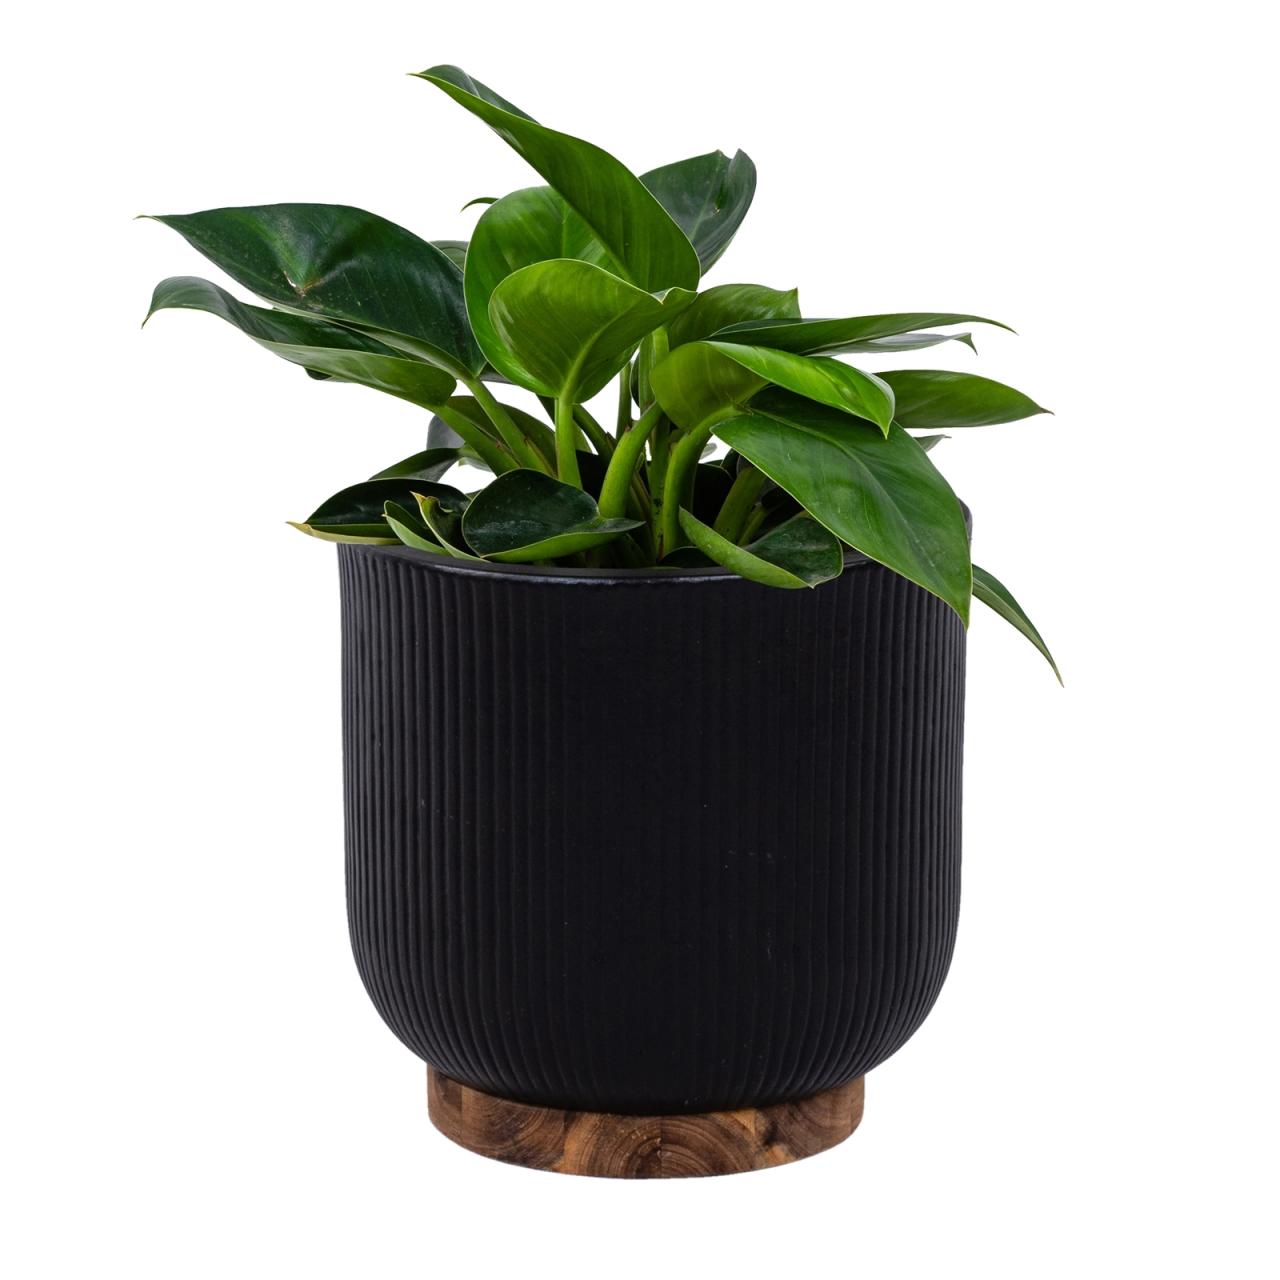 Hanging Plants Indoor | Bunnings Indoor Pots: A Guide to Choosing, Creating, and Displaying the Perfect Pots for Your Plants